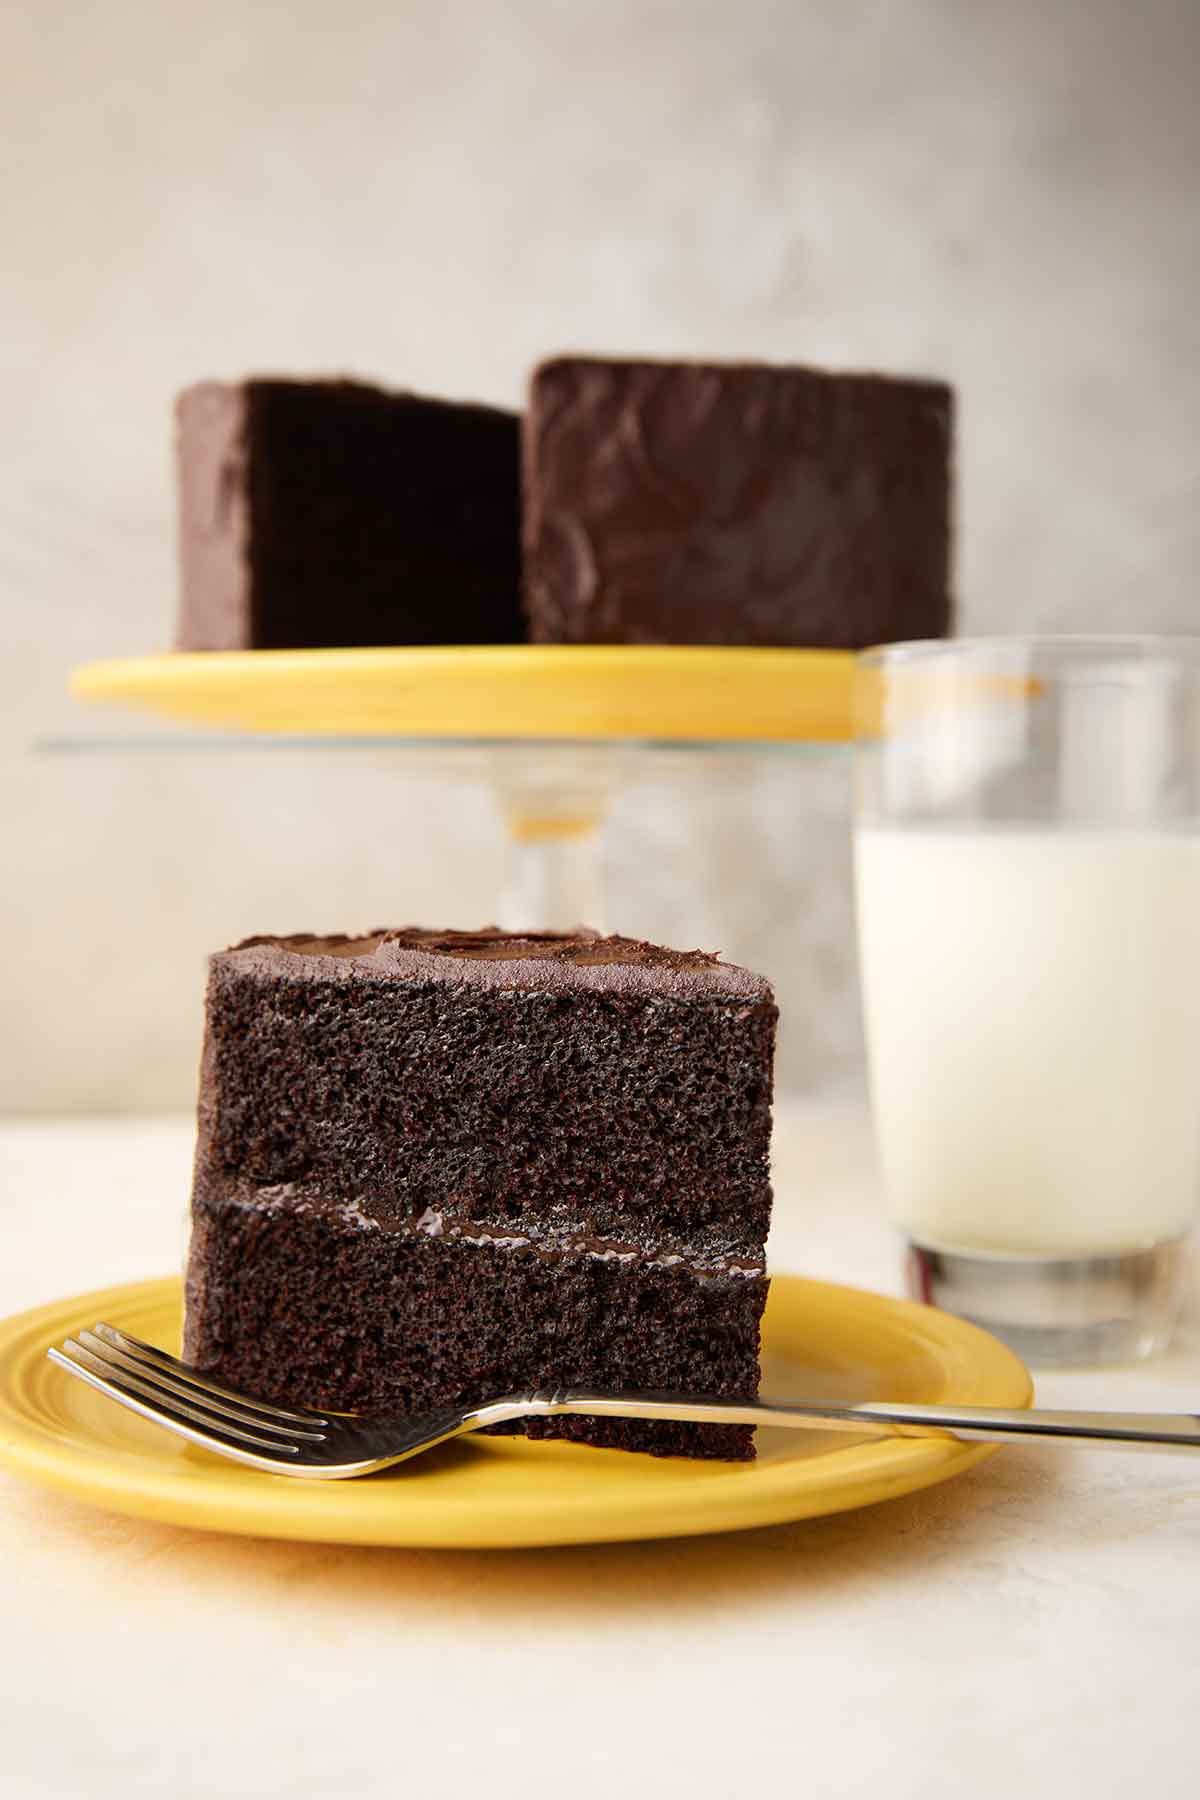 A slice of Hershey's chocolate cake with chocolate frosting on a yellow plate, with the remaining cake on a stand in the background.